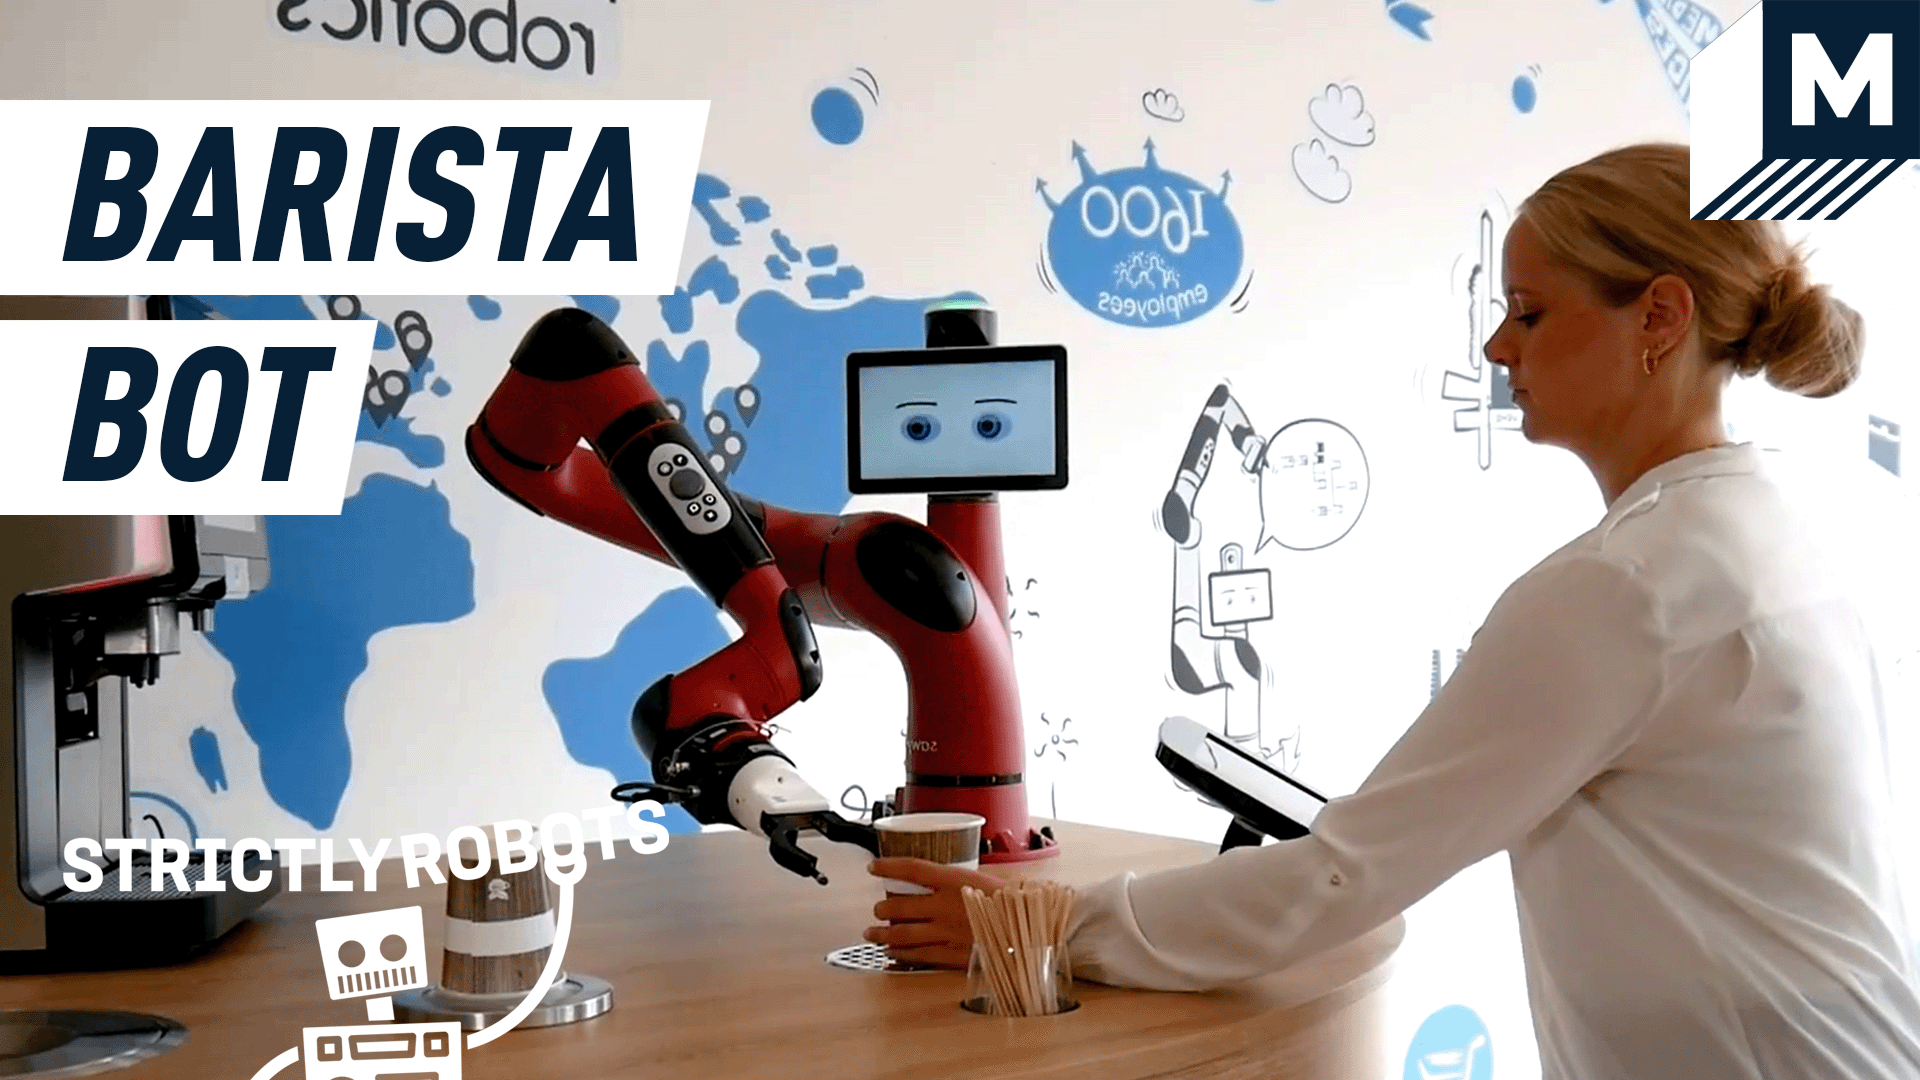 Designed to take on more difficult tasks, this robot will also serve you coffee